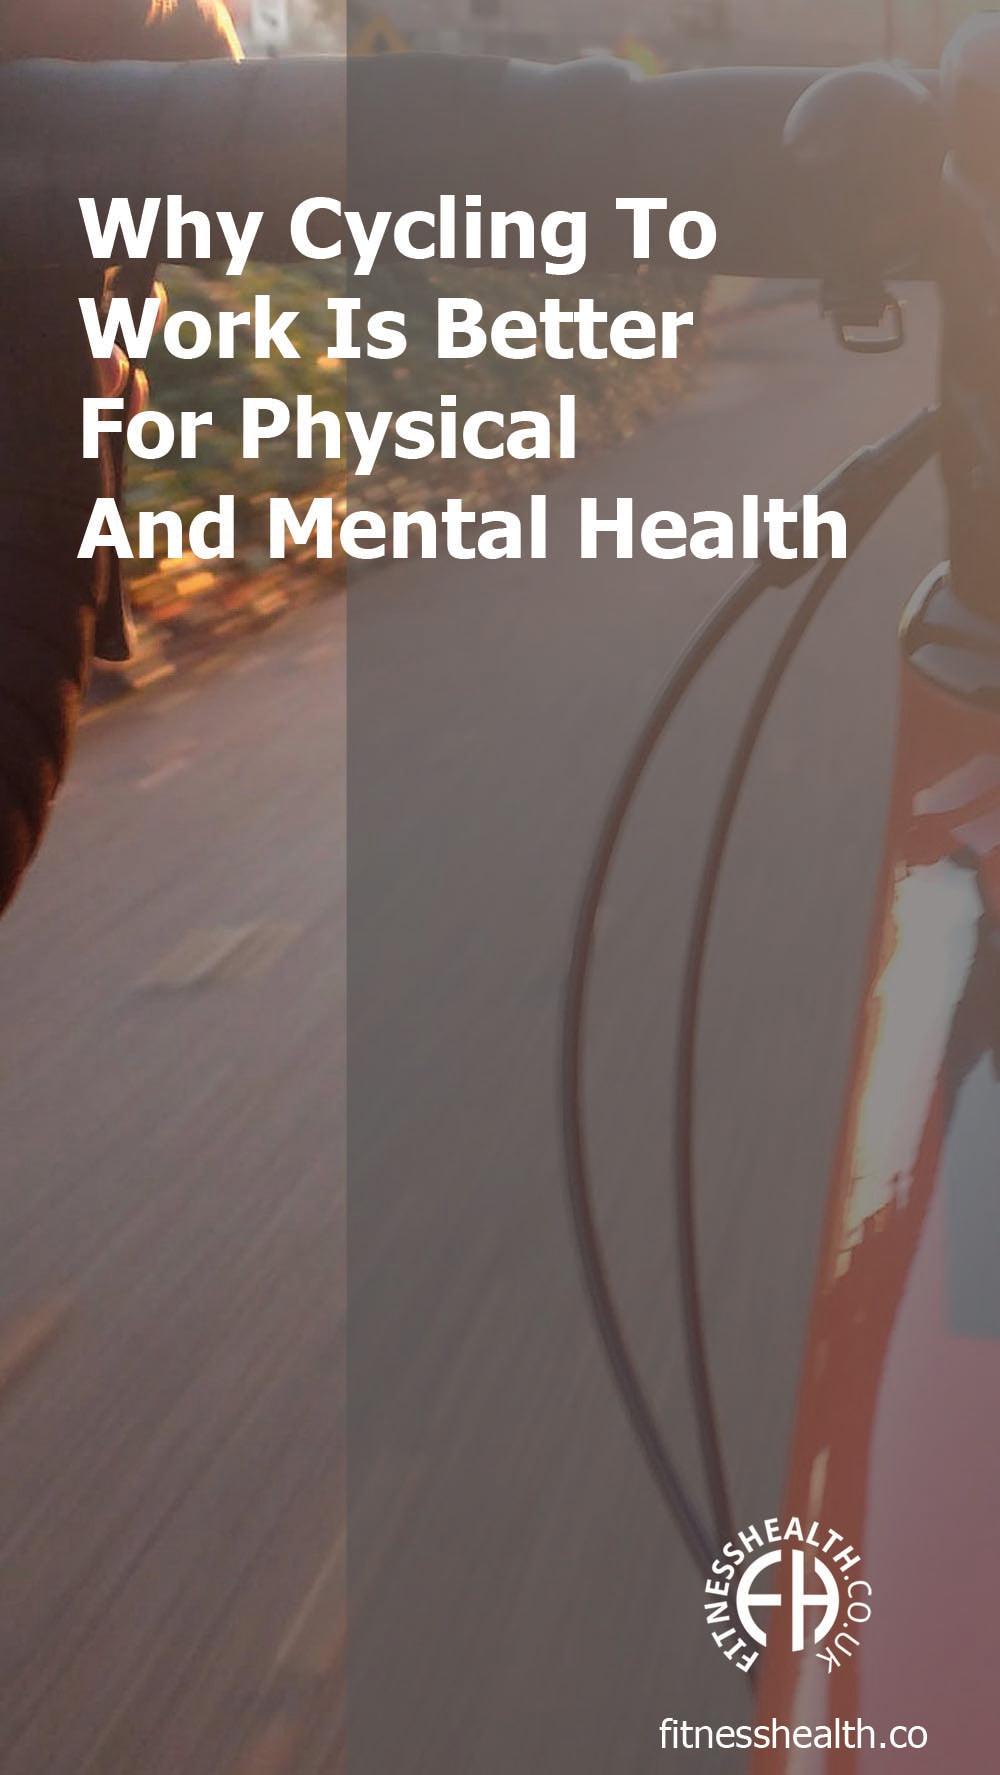 Why Cycling To Work Is Better For Physical And Mental Health - Fitness Health 